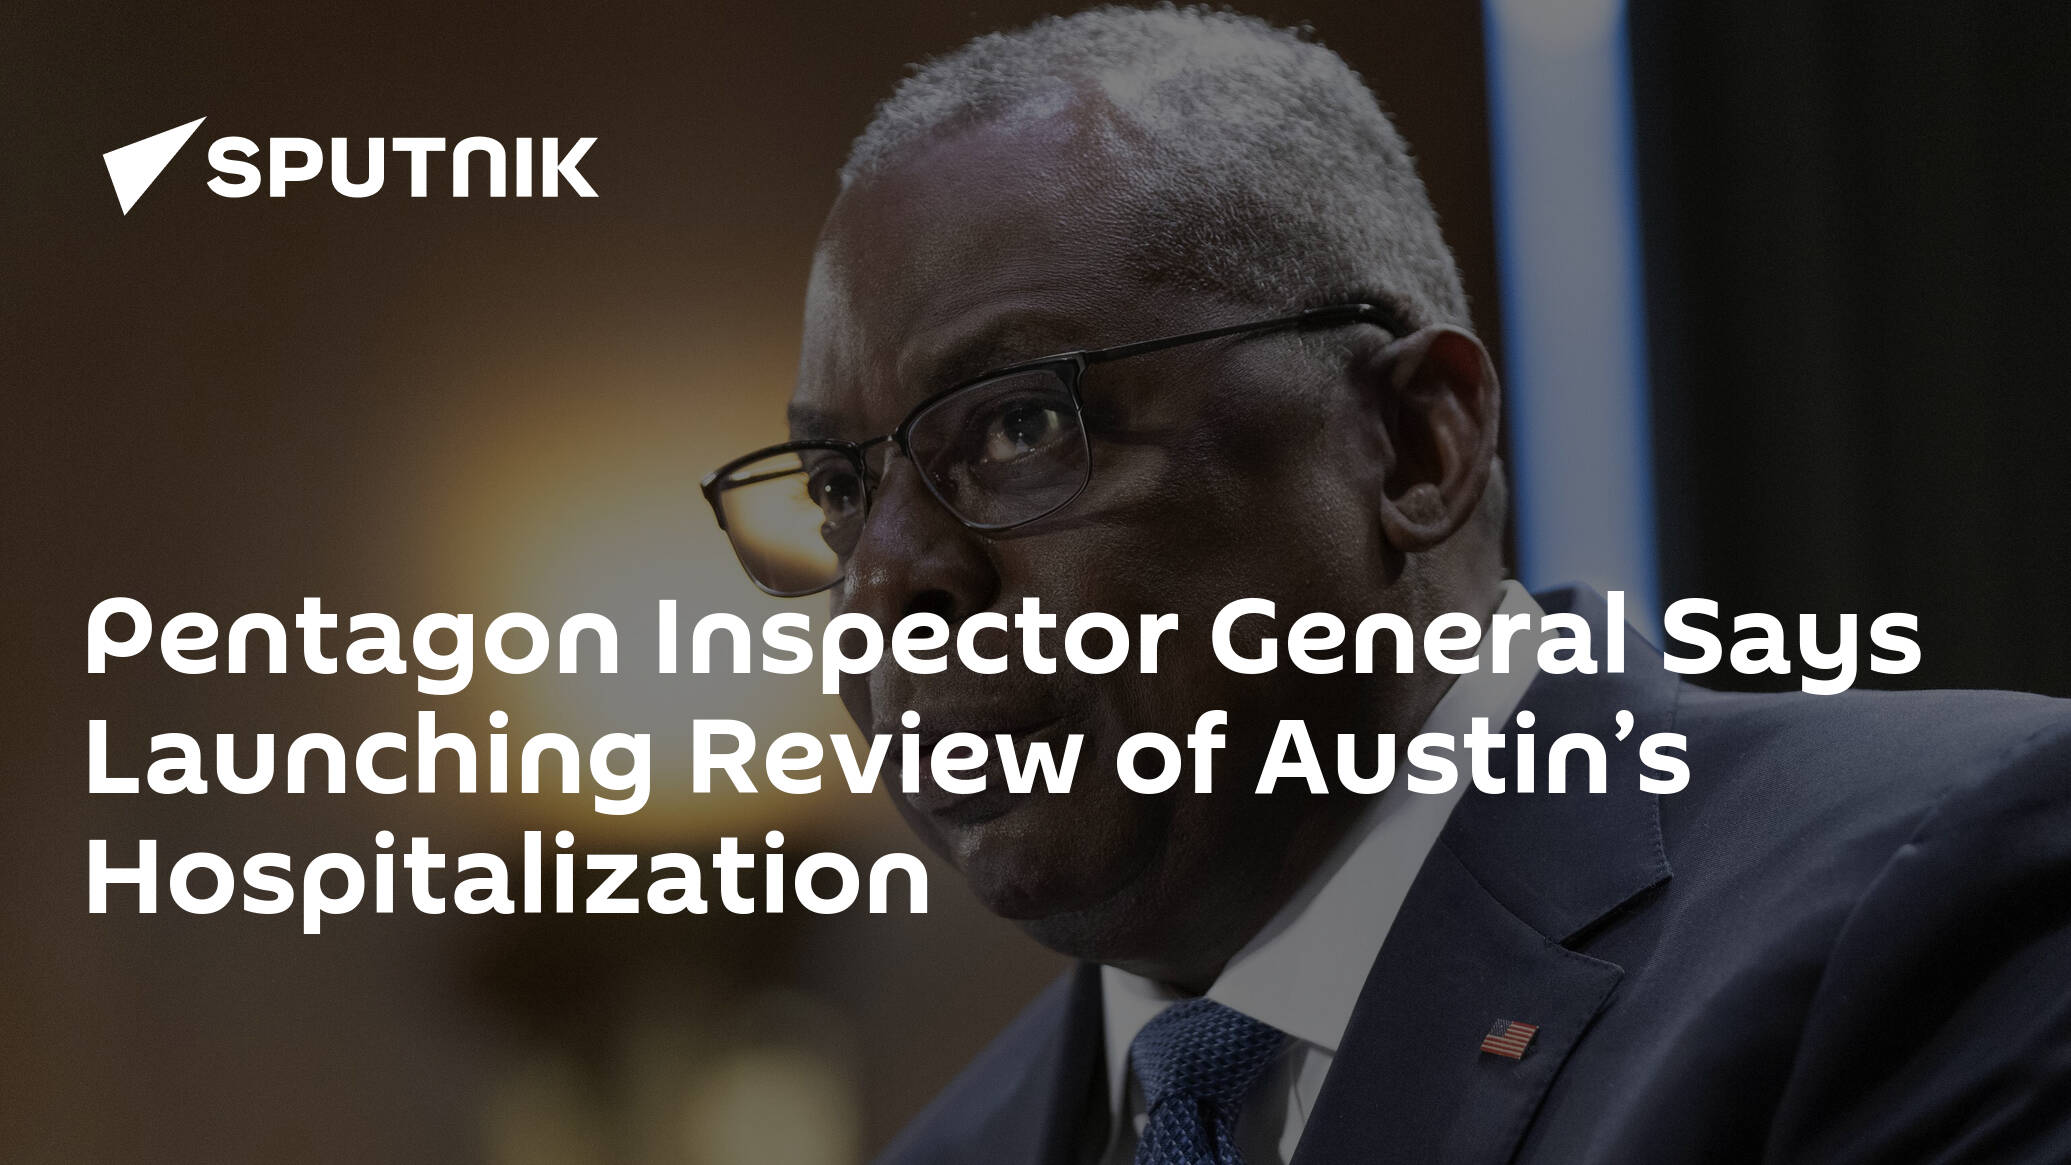 Pentagon Inspector General Says Launching Review of Austin’s Hospitalization